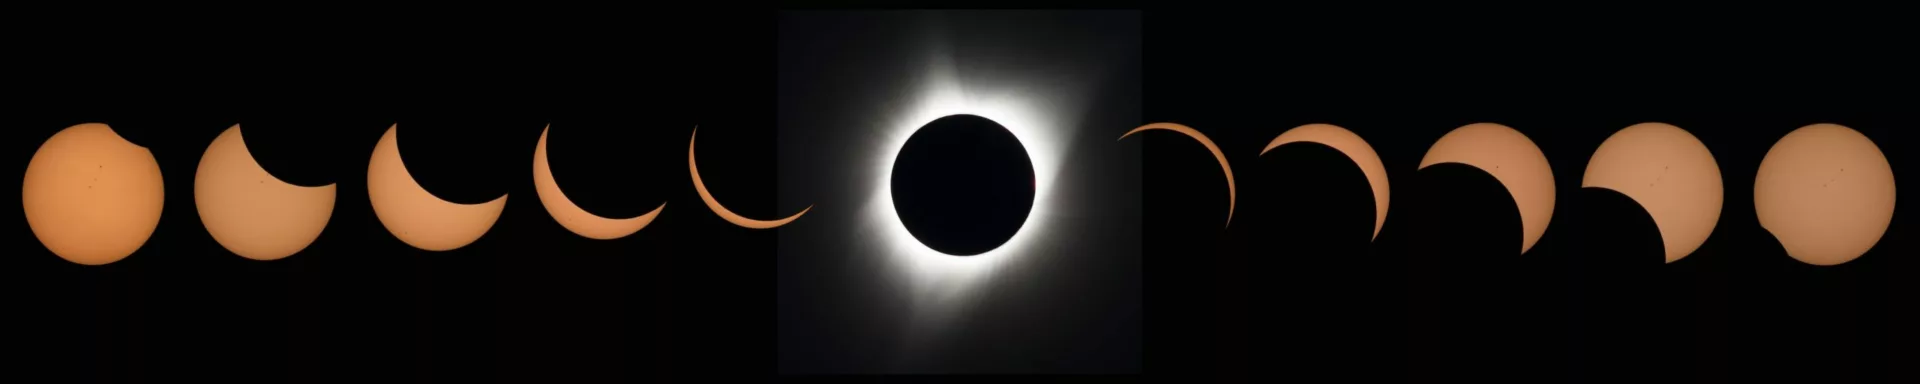 Black graphic with various phases of a solar eclipse. Total eclipse in center surrounded by partial eclipse phases.